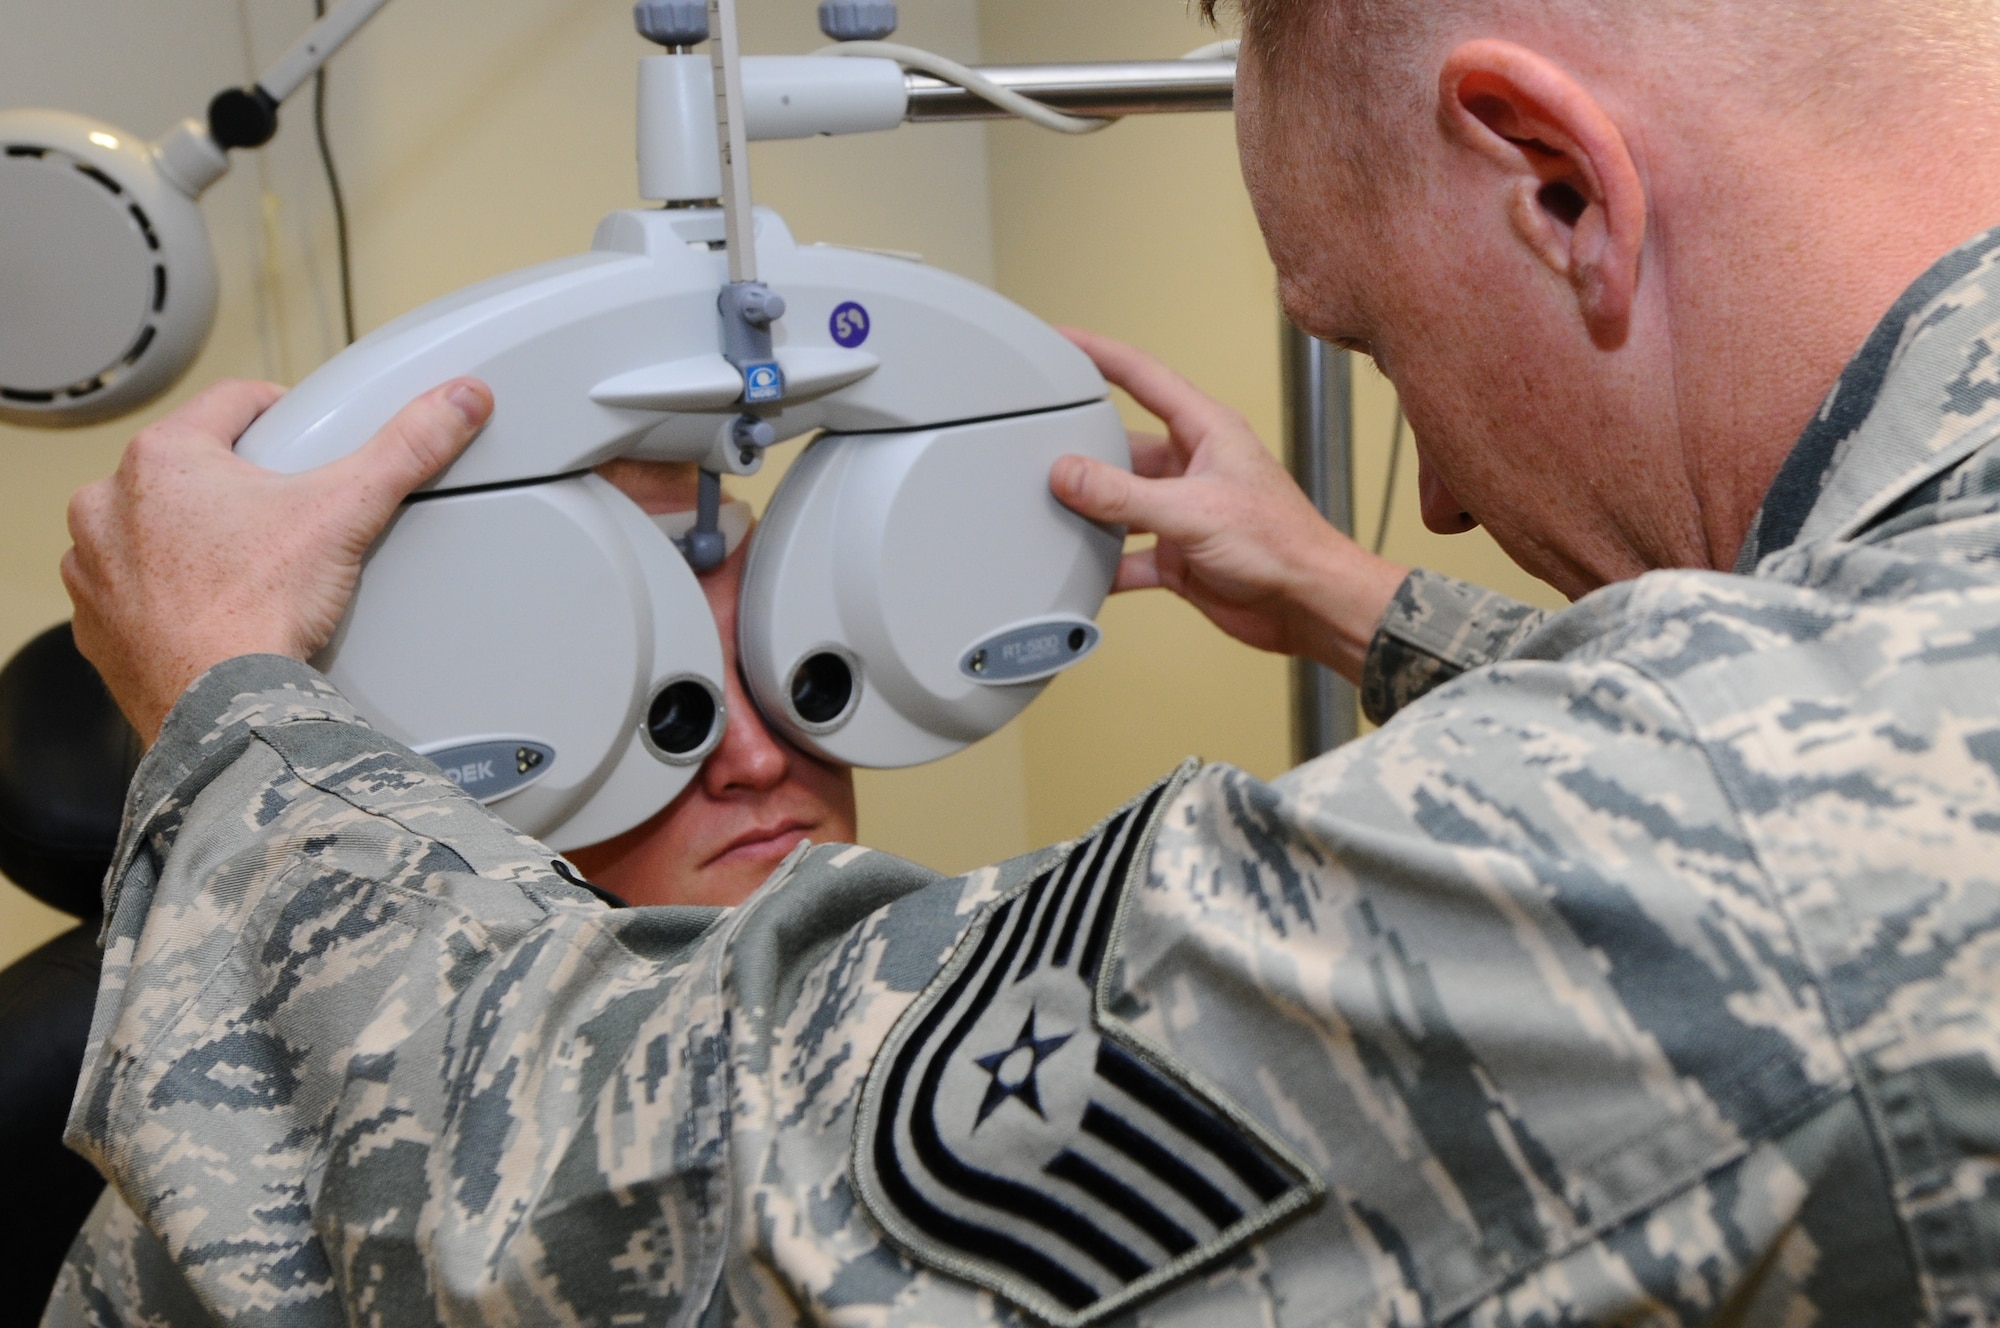 ANDERSEN AIR FORCE BASE, Guam - Tech. Sgt. Joshua Karash, 36th Medical Operations Squadron optometry technician, uses the phoropter to measure the refractive error to determine the patient’s prescription needed July 18. By changing these lenses, the technician is able to find the necessary prescription to correct a person's refractive error.  (U.S. Air Force photo by Senior Airman Carlin Leslie/Released)